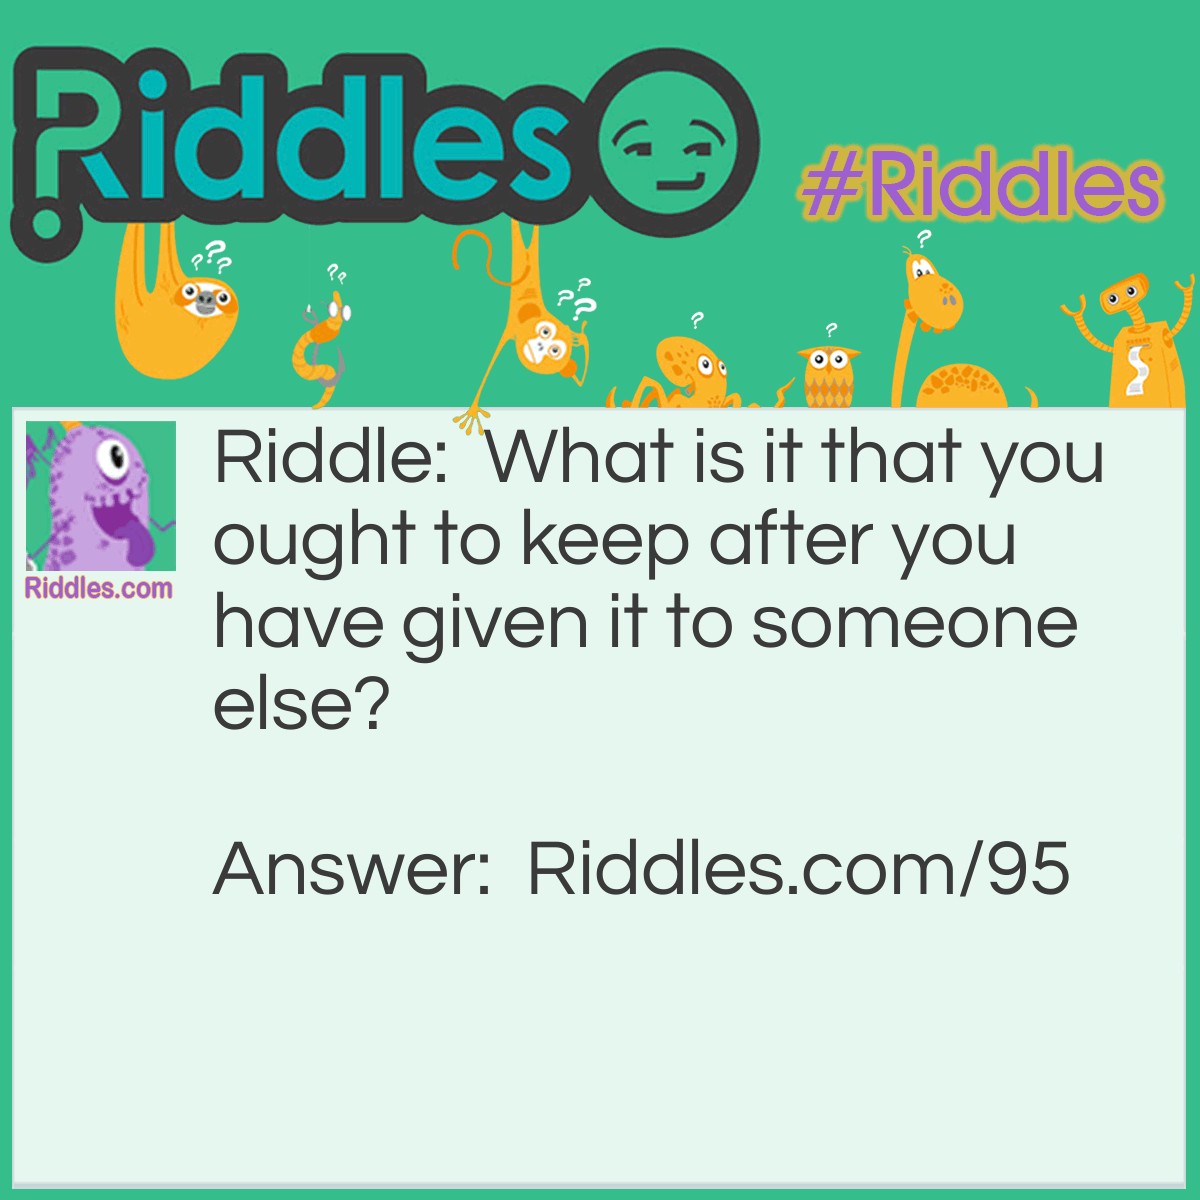 Riddle: What is it that you ought to keep after you have given it to someone else? Answer: A promise, of course.